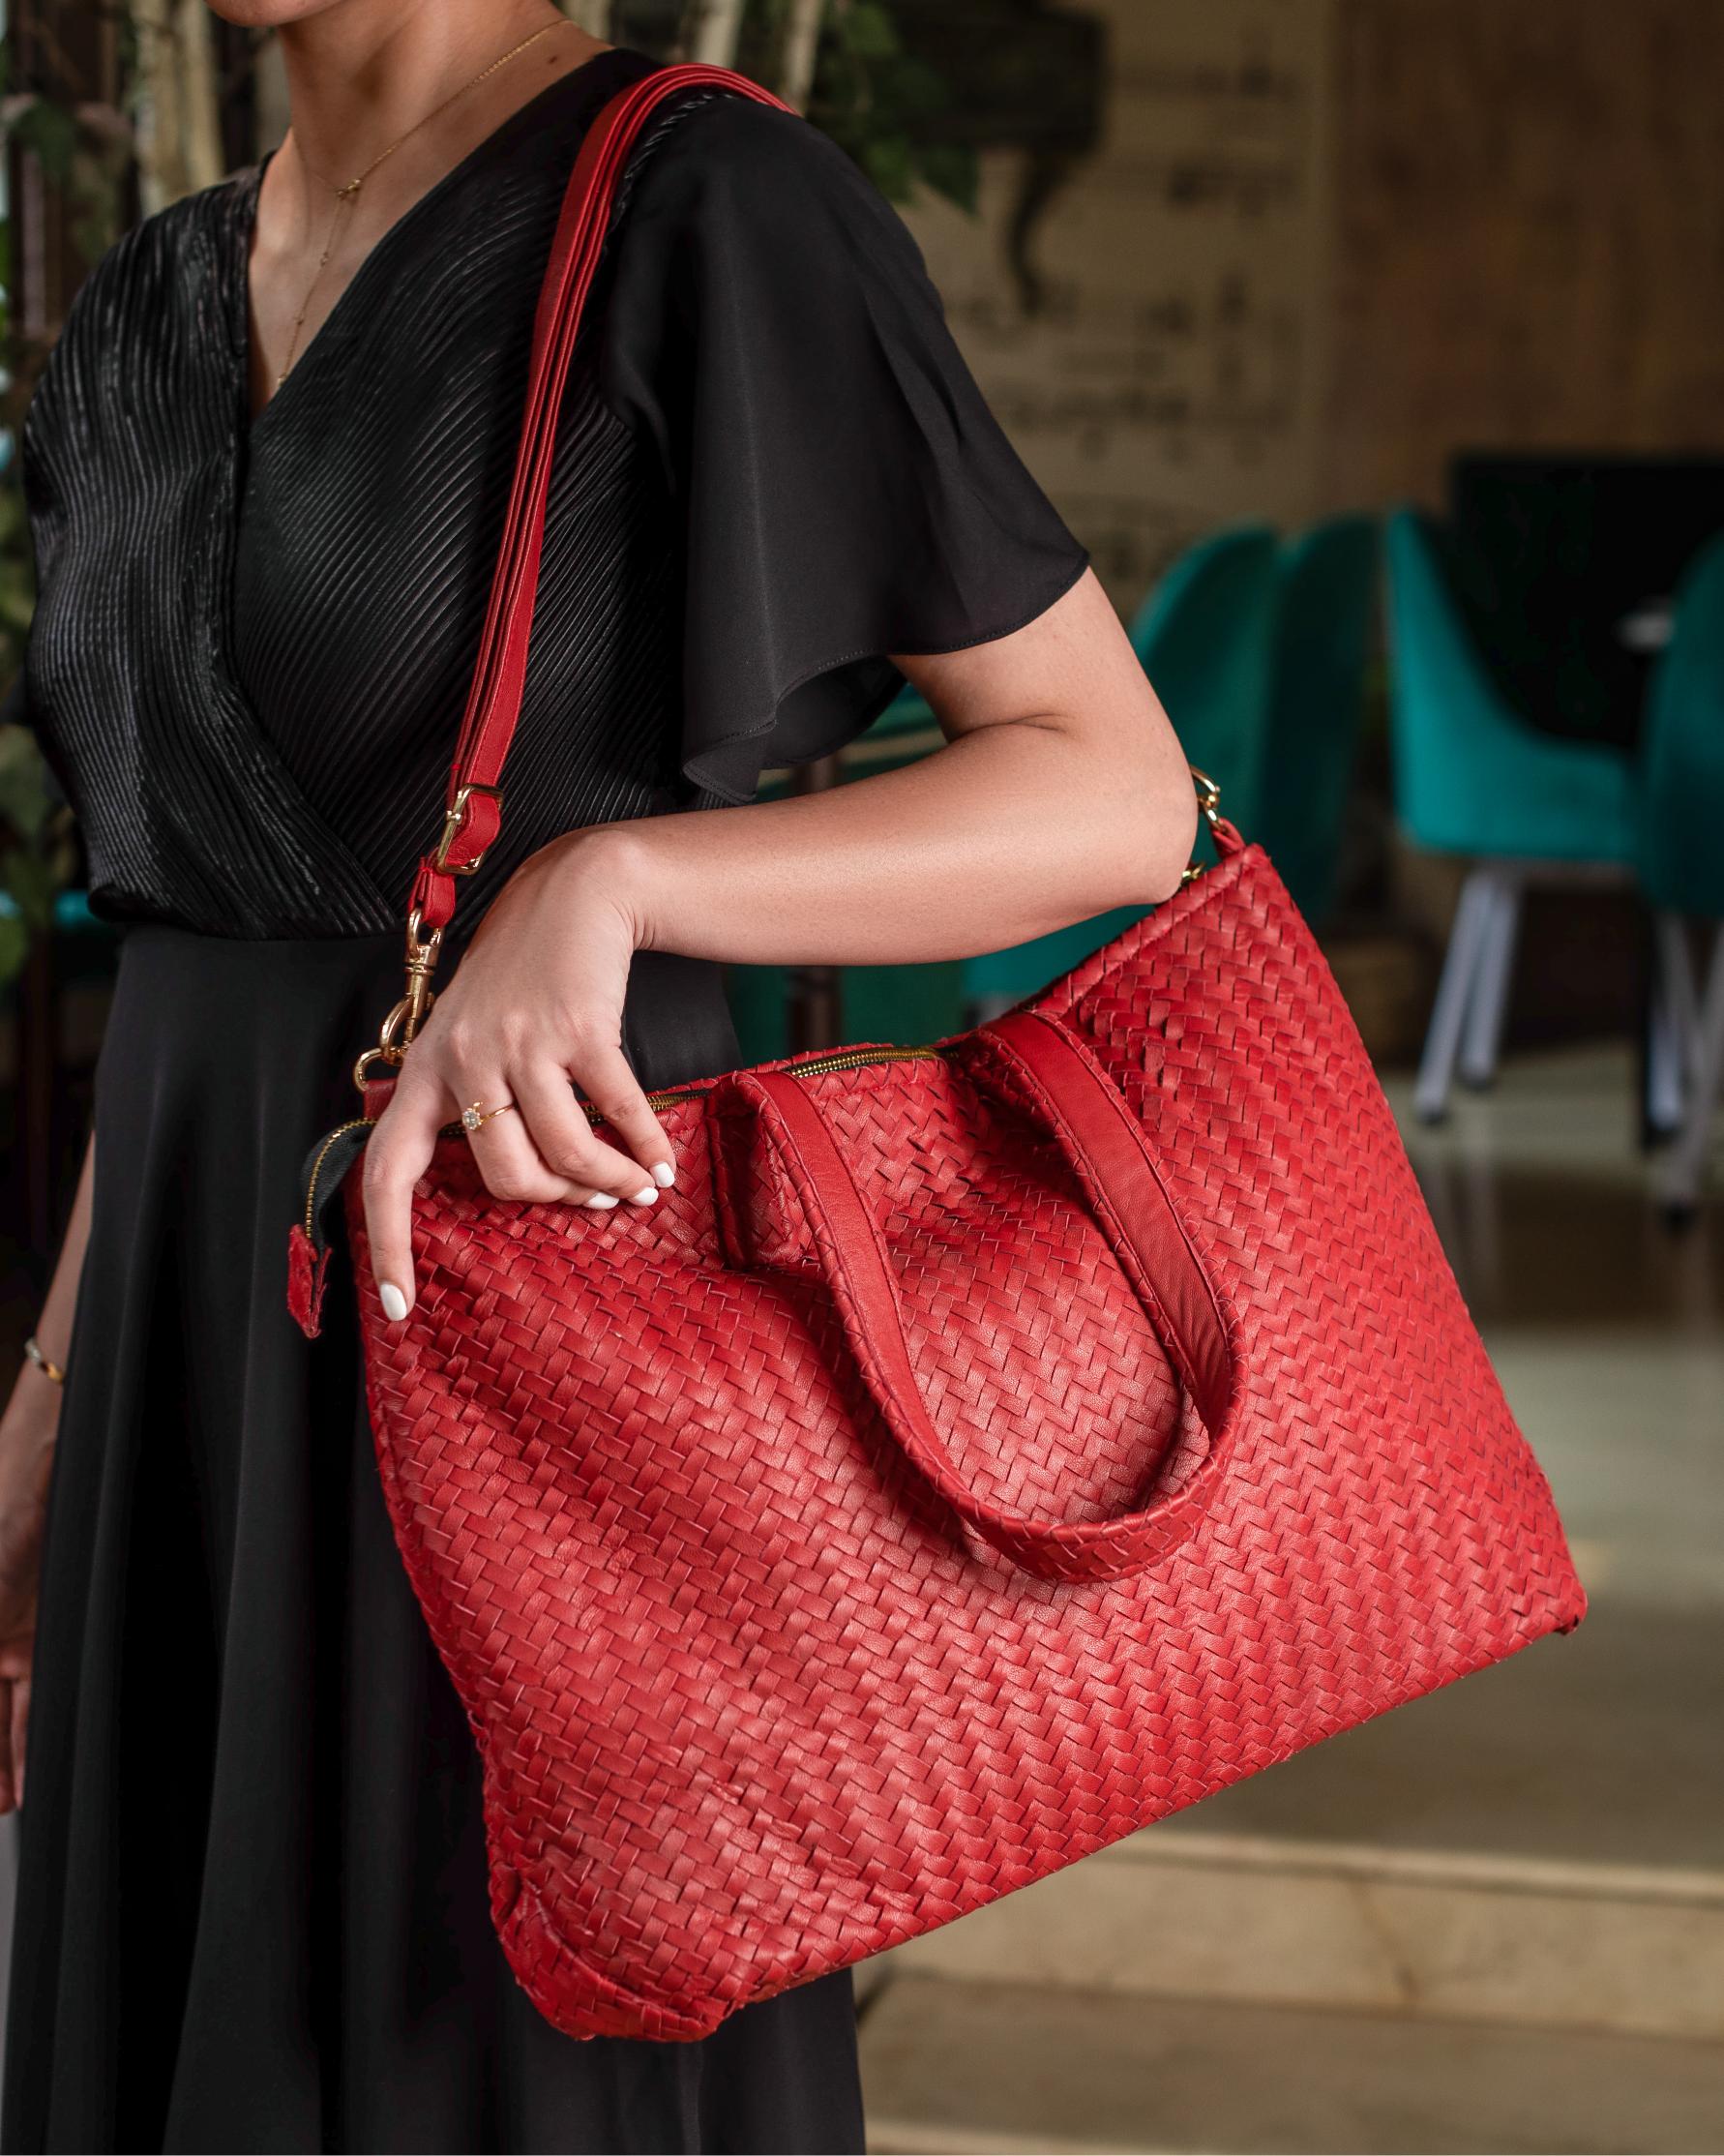 Handmade Woven Original Leather Bag With Zipper-Red